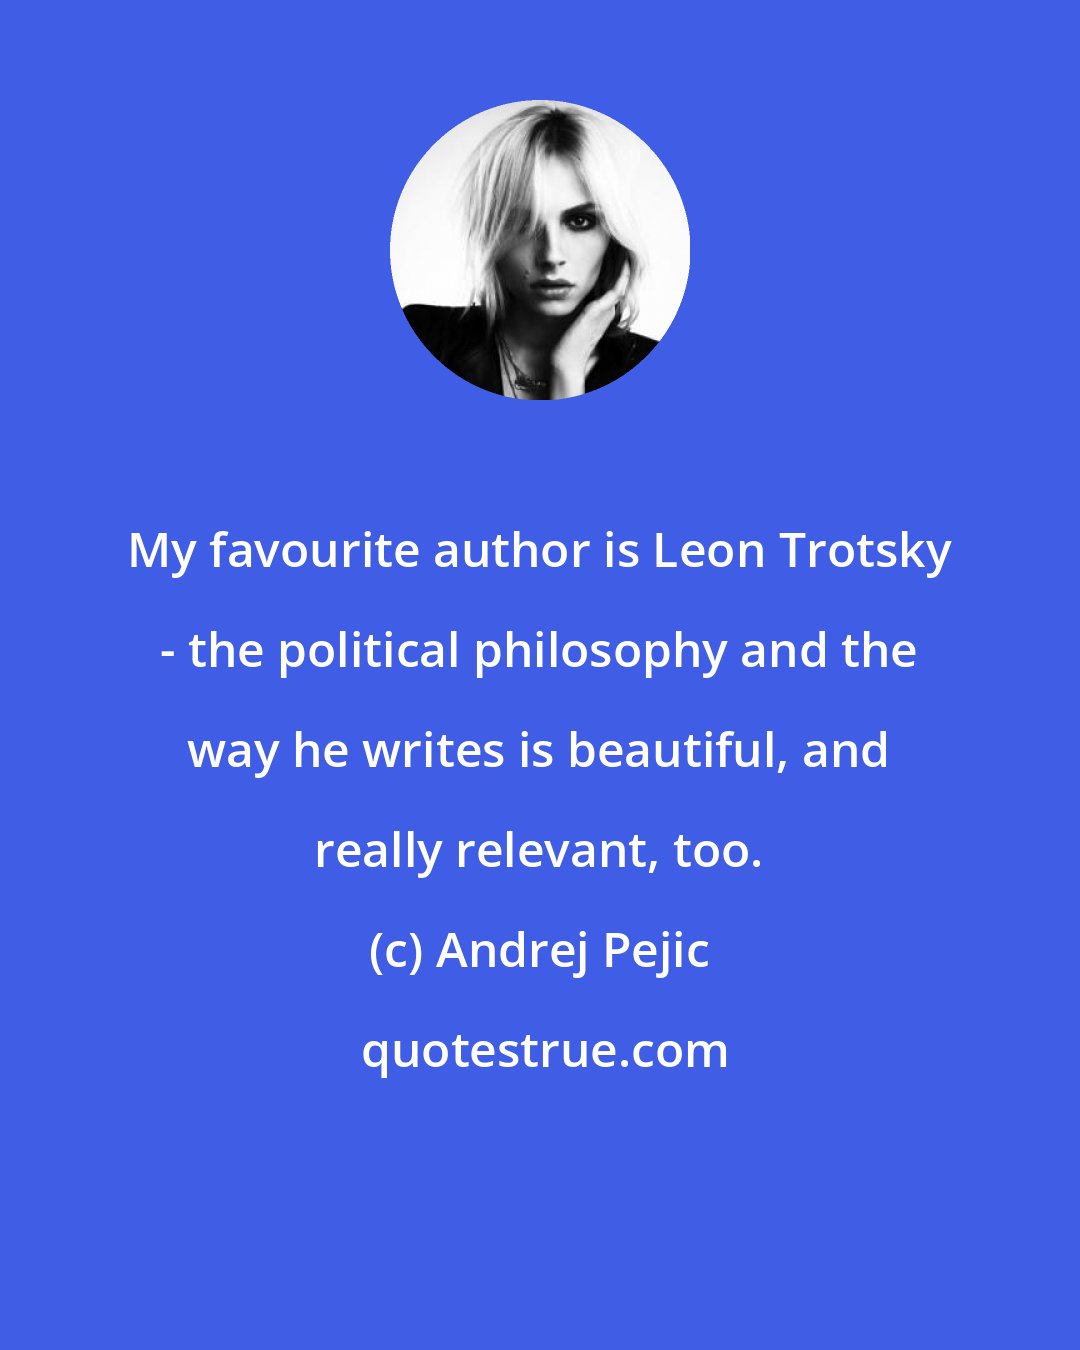 Andrej Pejic: My favourite author is Leon Trotsky - the political philosophy and the way he writes is beautiful, and really relevant, too.